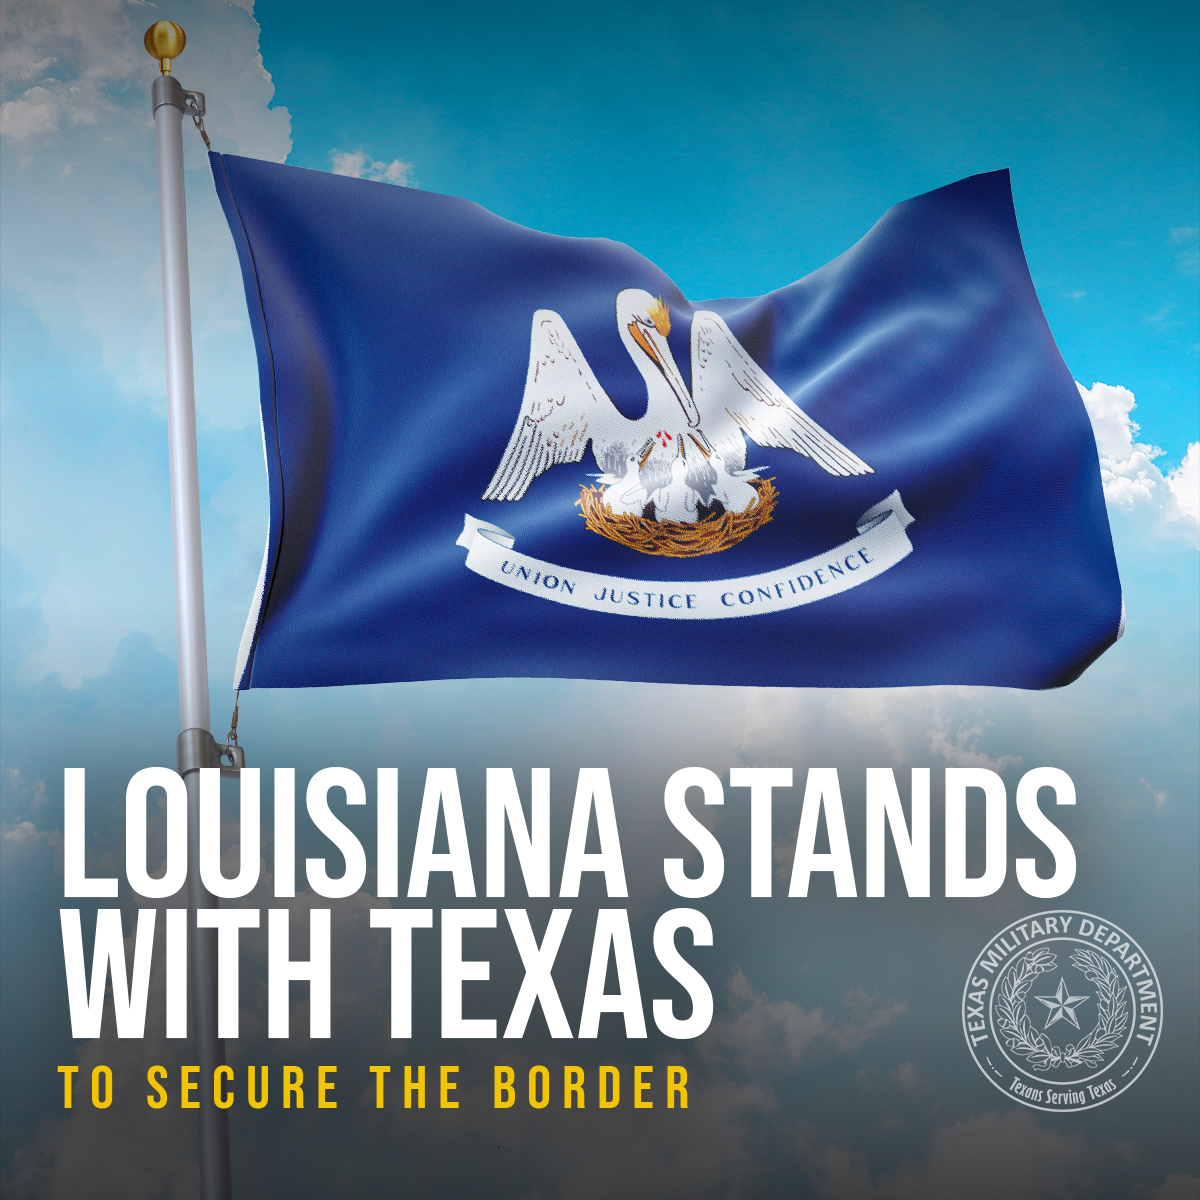 Louisiana stands with Texas